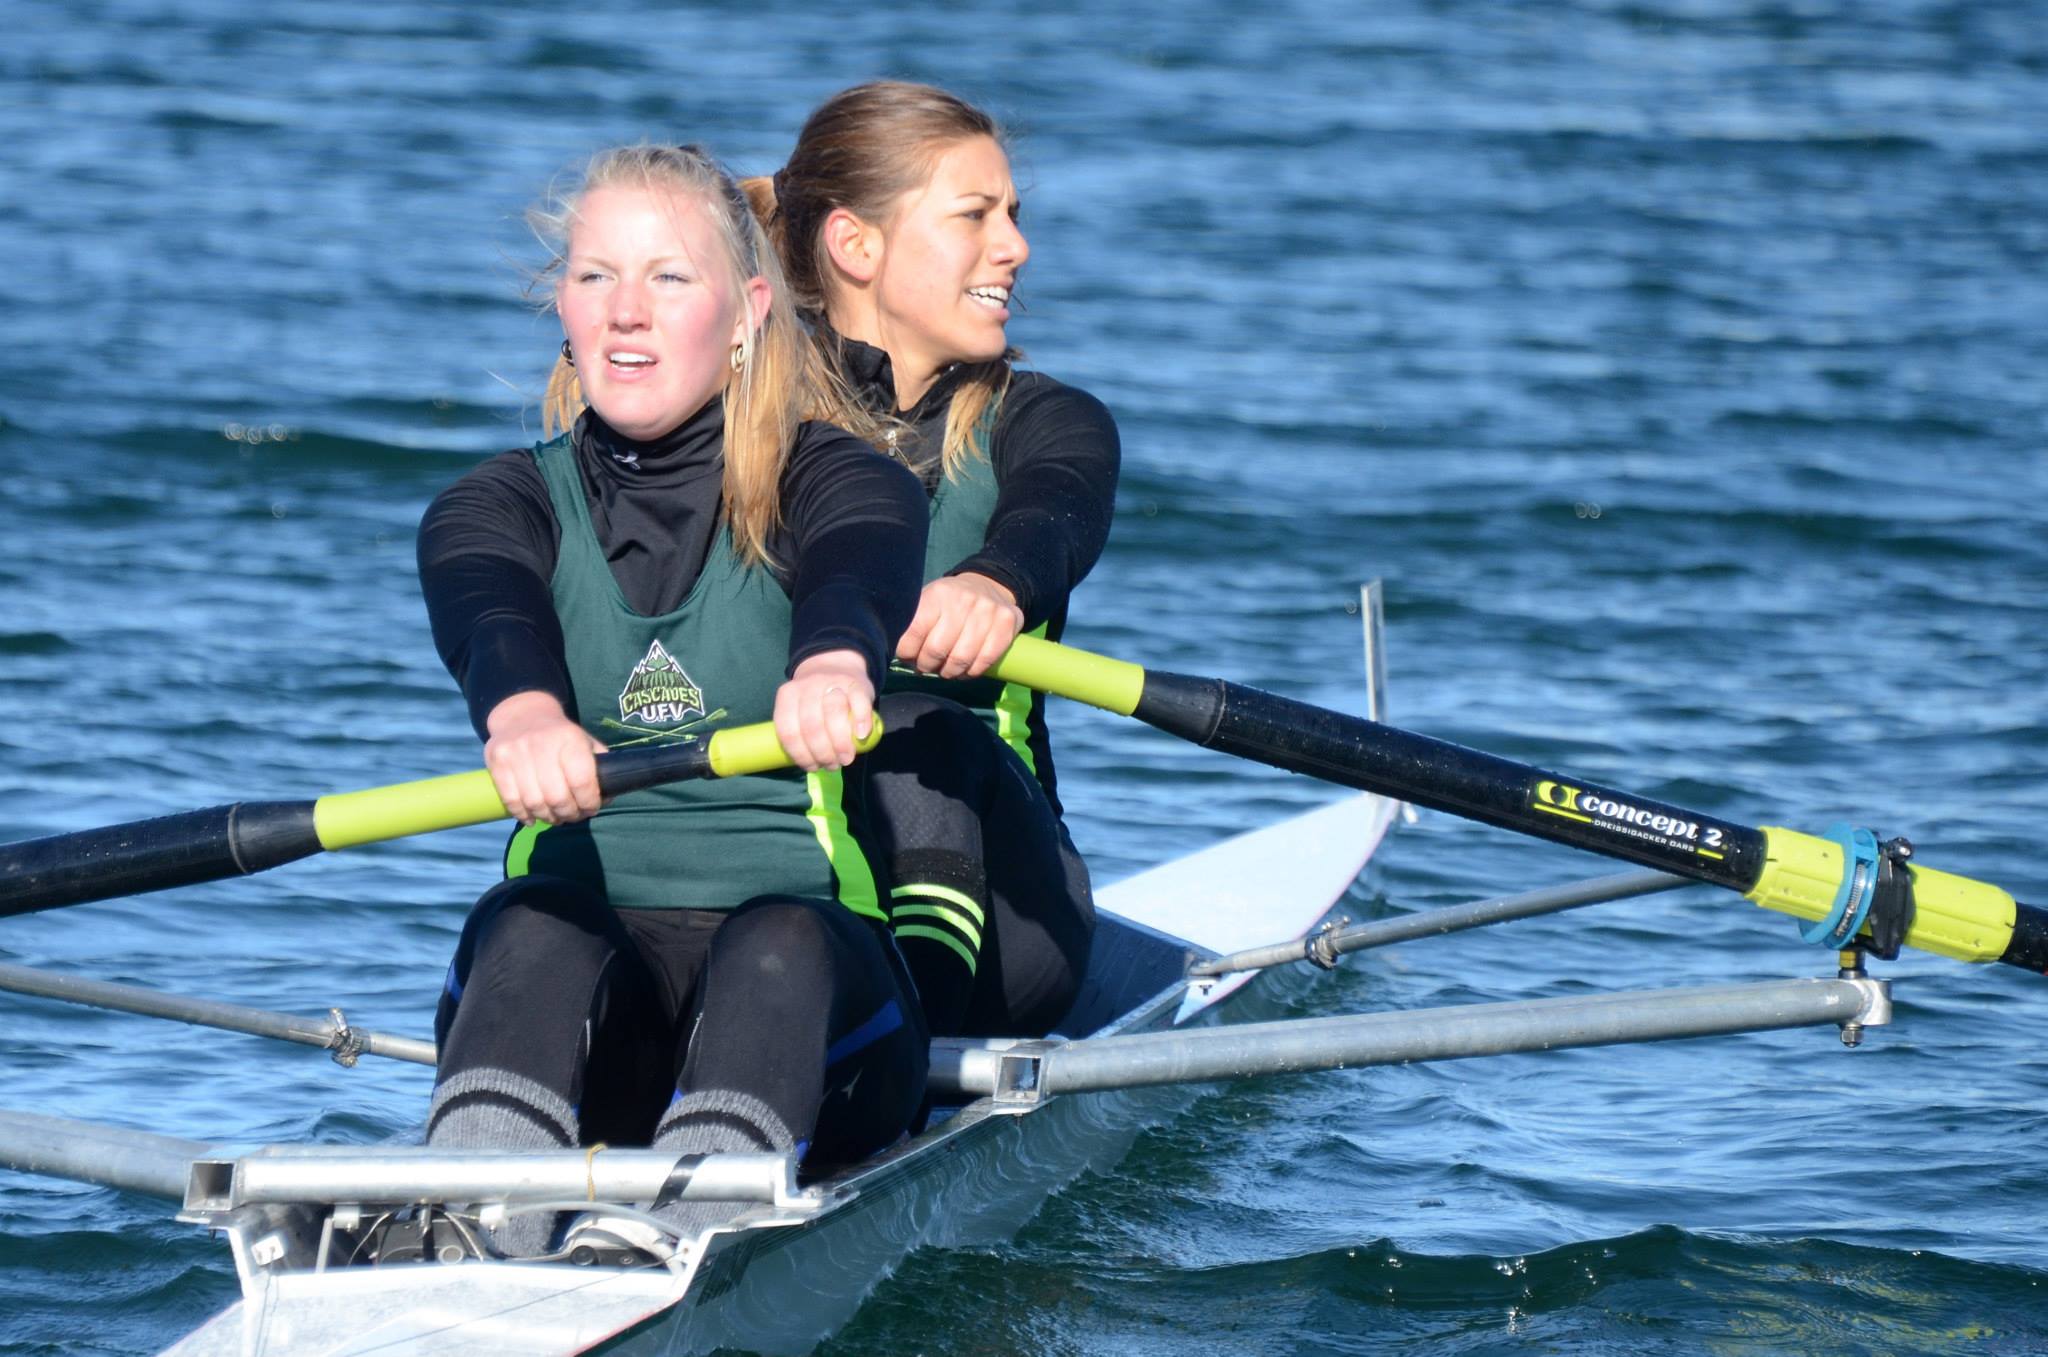 Rowing squad travels to nationals with smaller crew and little funding, but star effort